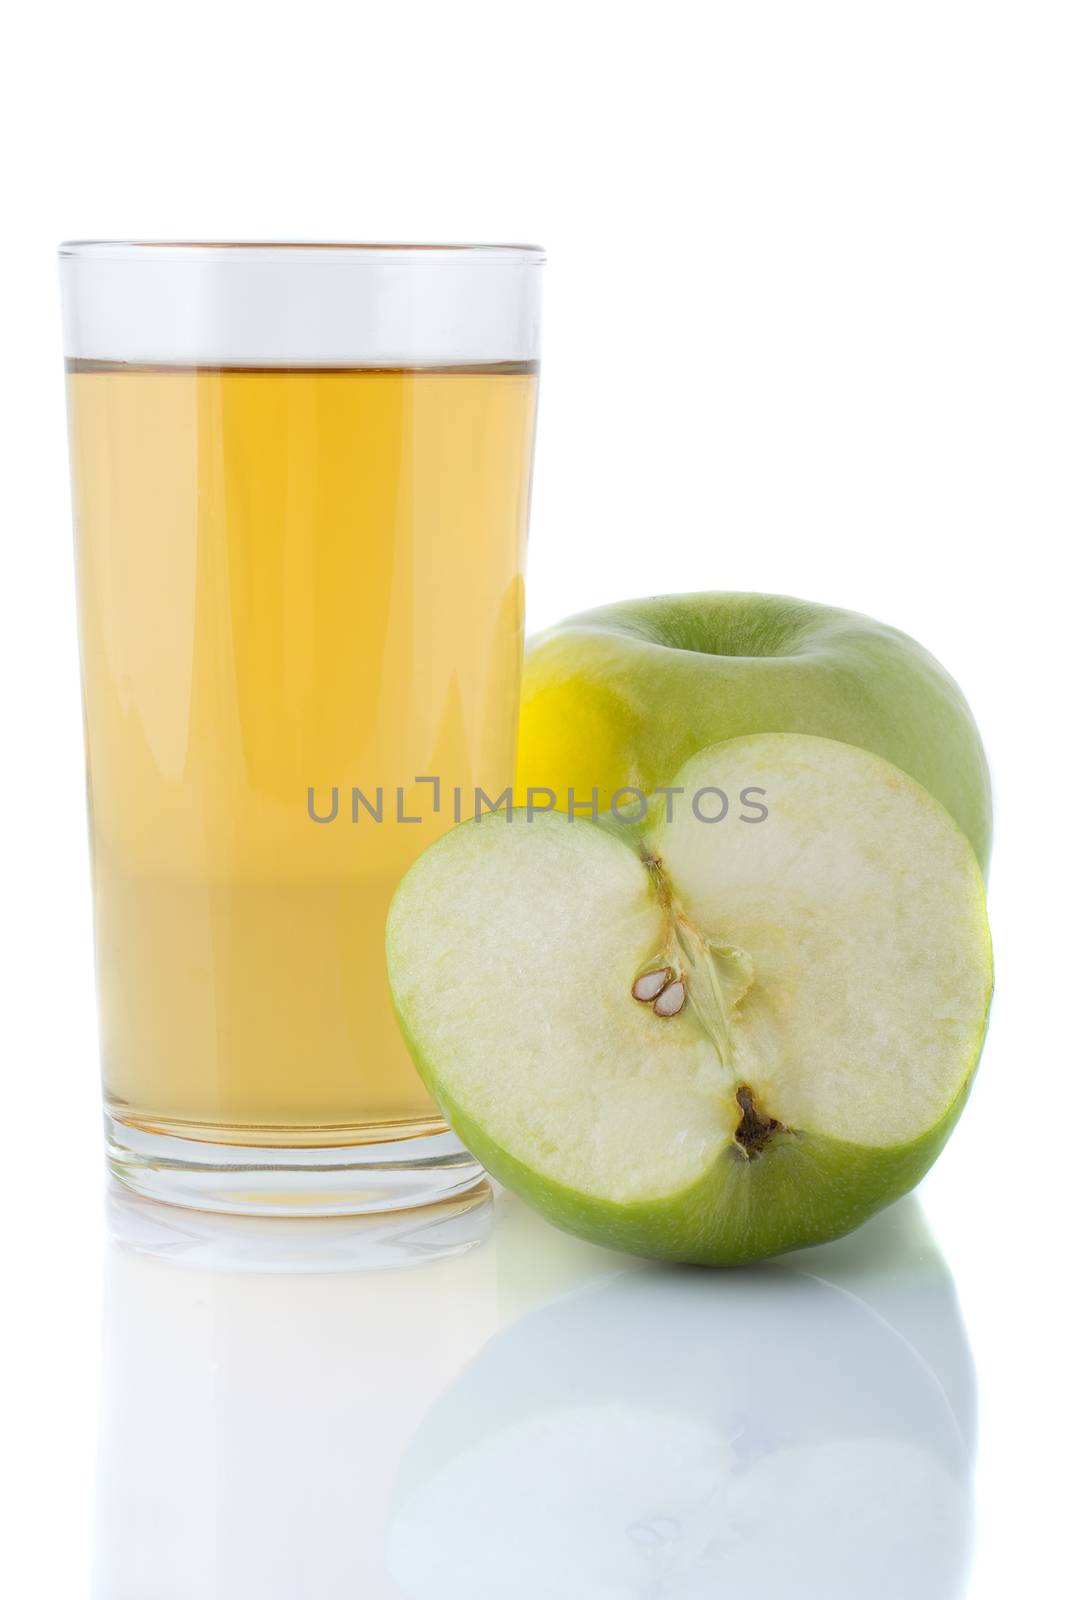 A glass of fresh apple juice next to the apple.